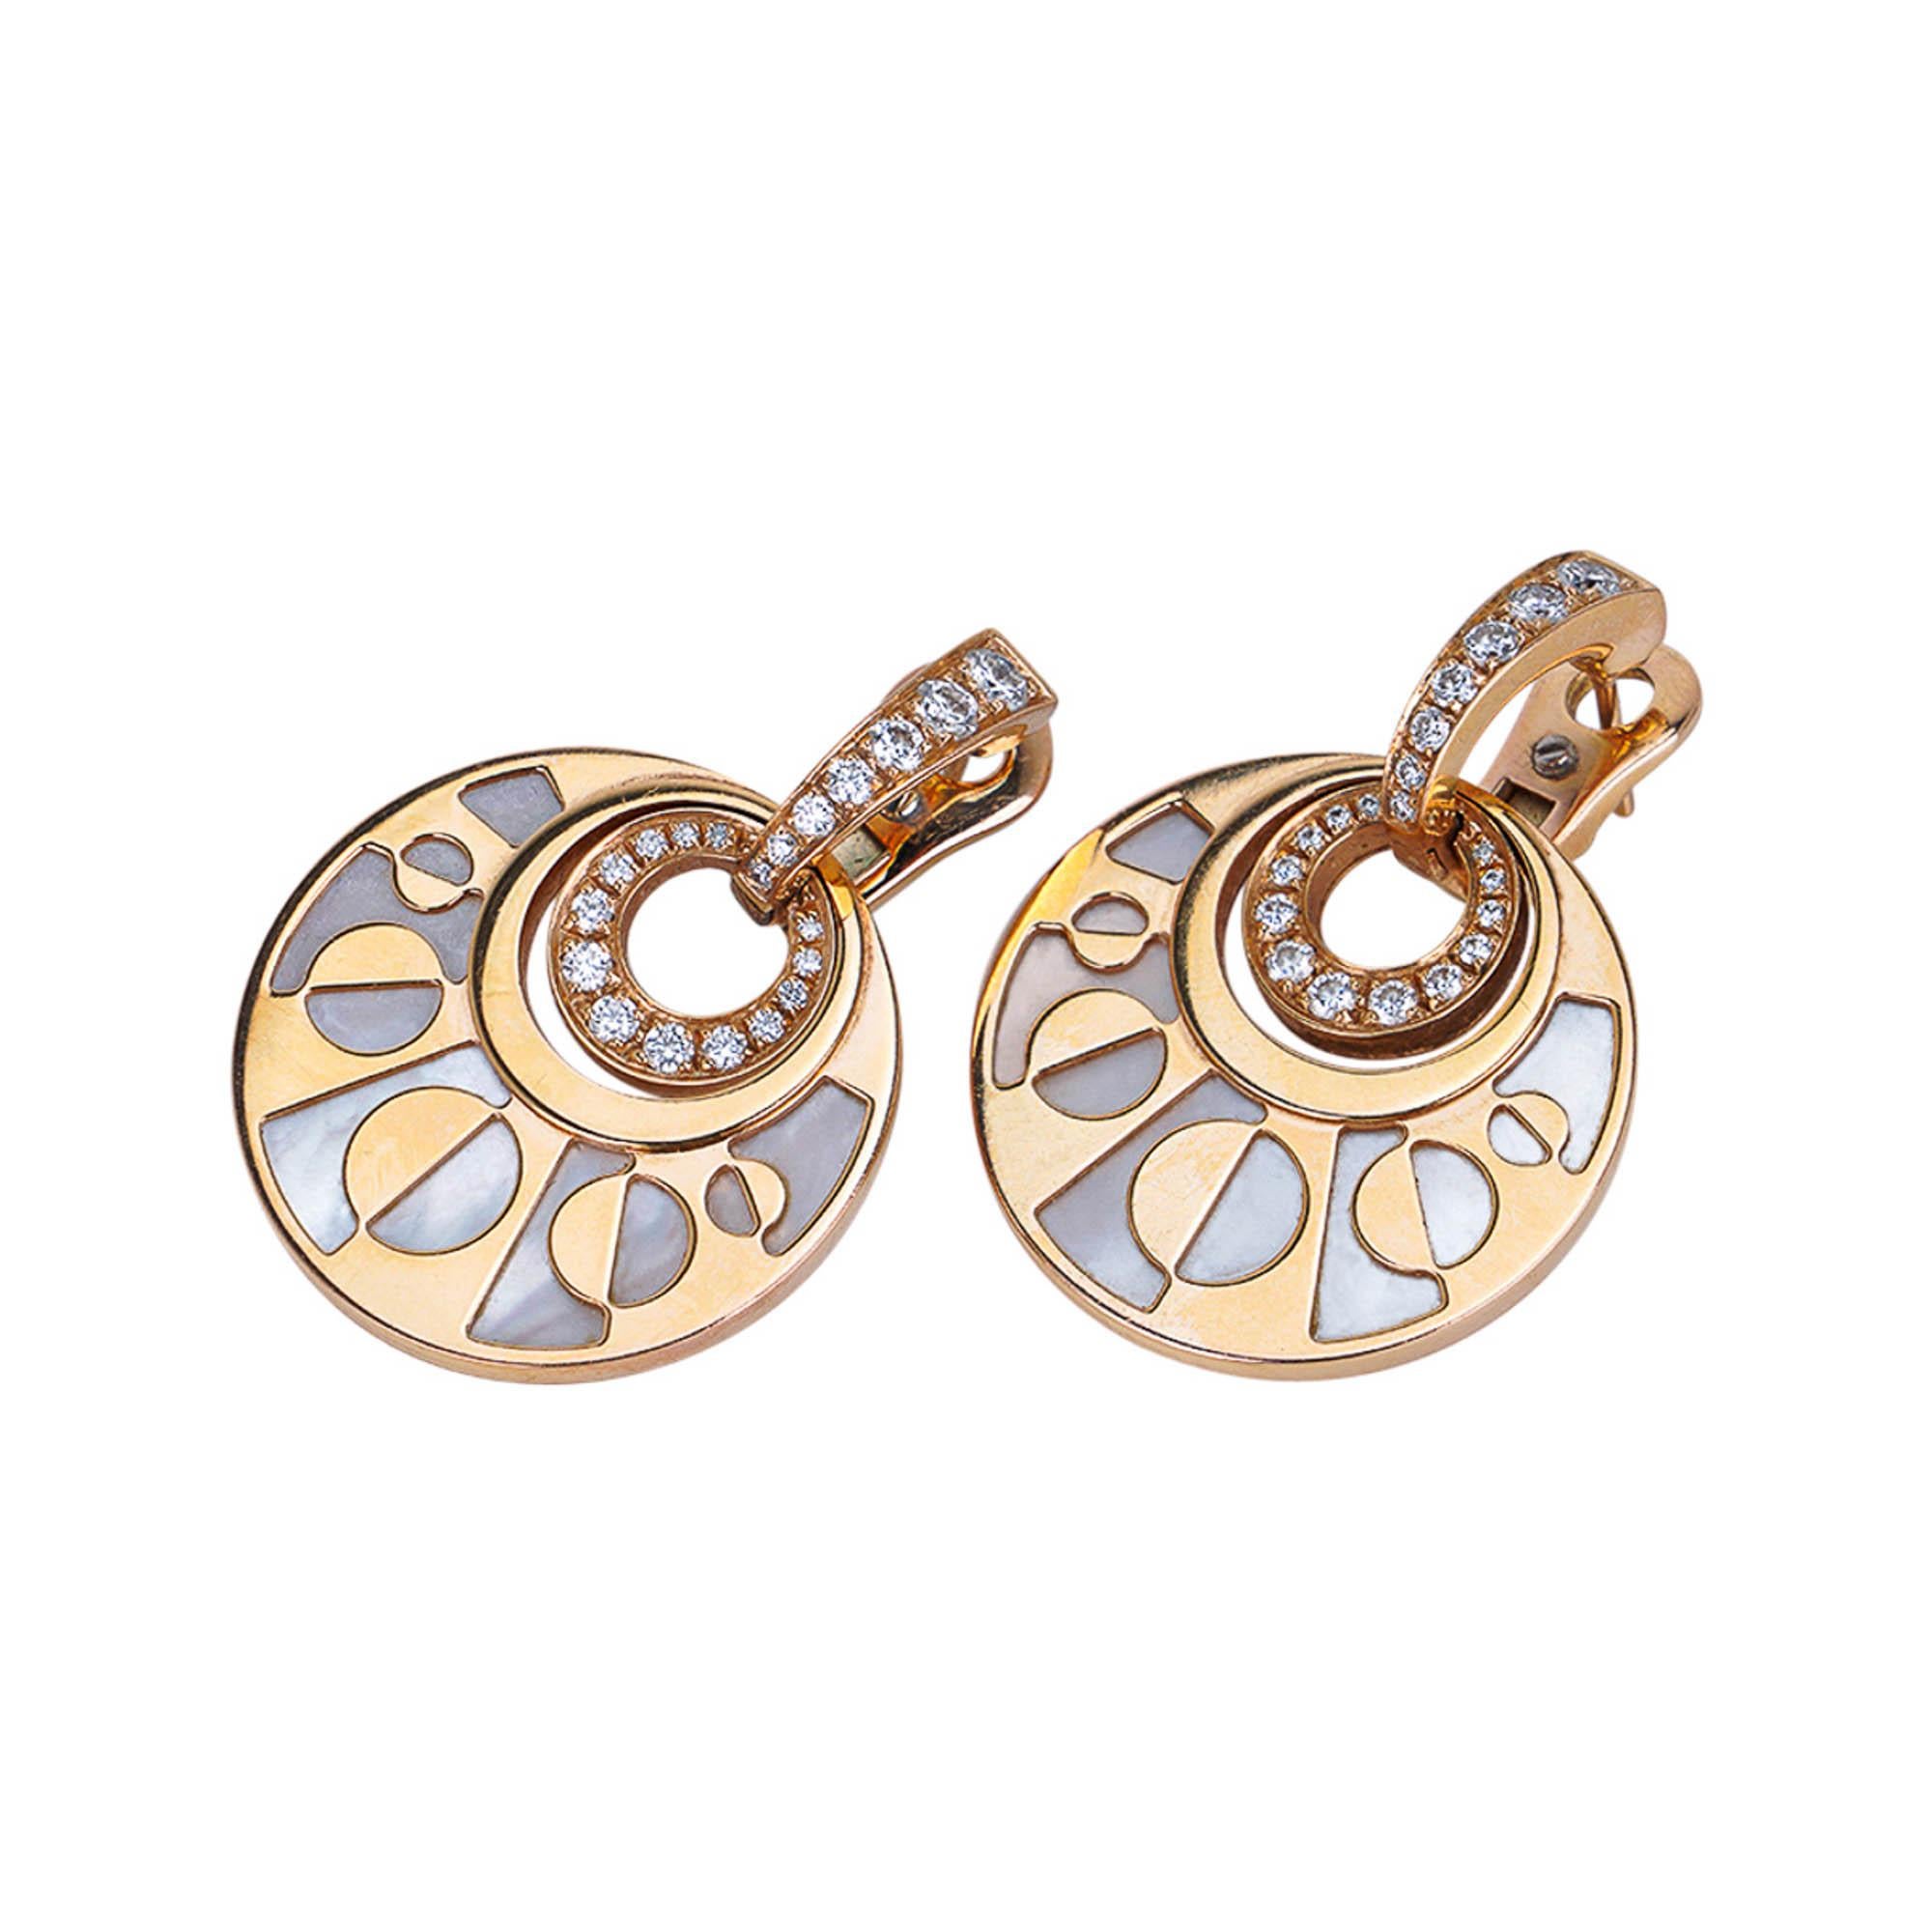 Mightychic offers a pair of fabulous Bvlgari earrings featured in Rose Gold with diamonds and inlayed Mother-of Pearl.
From the Mediterranean Eden collection, these circle within circle earrings with the geometric inlay of white Mother-of-Pearl in